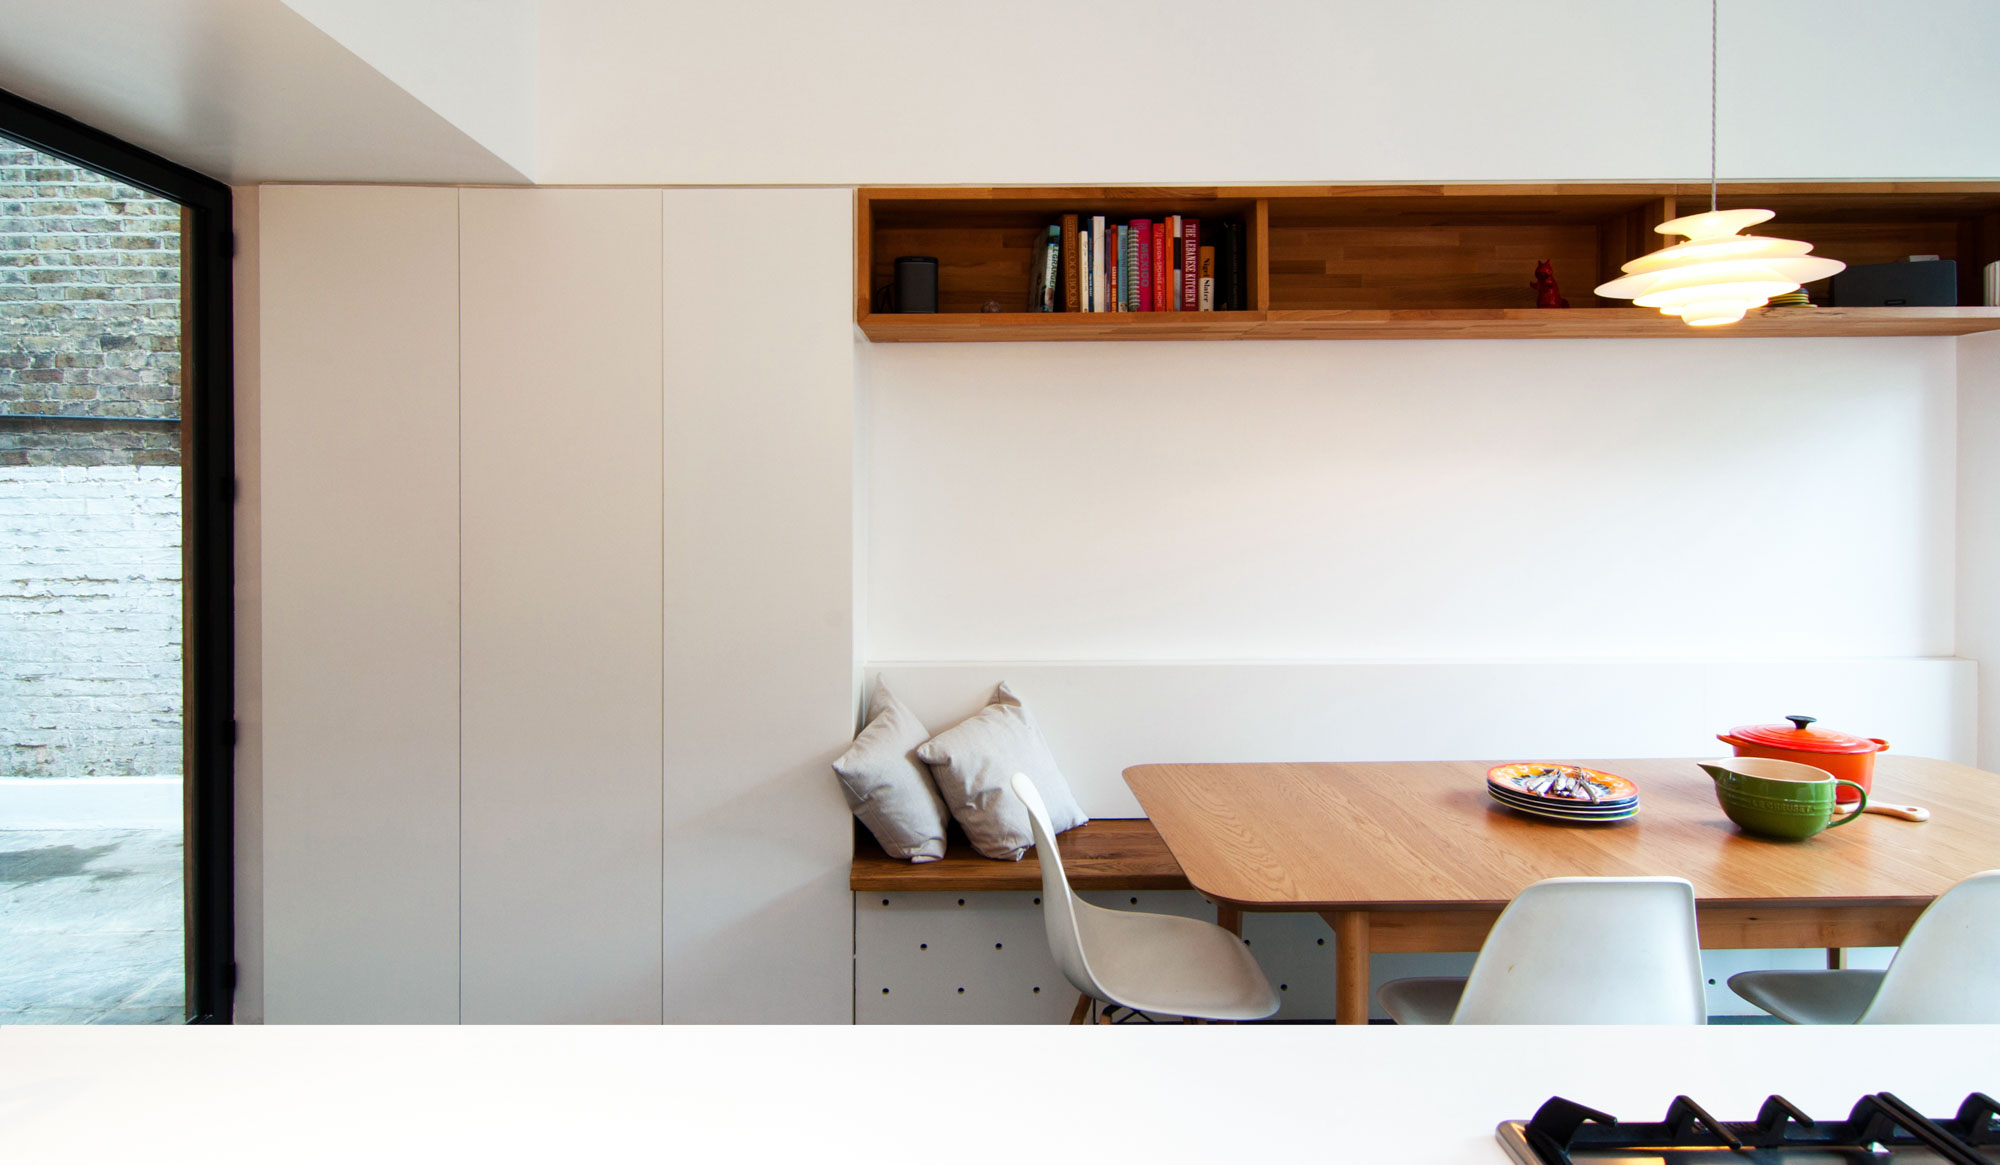 New kitchen extension highlighting key details such as the timber bookshelf and bench within the white contemporary storage cabinets.